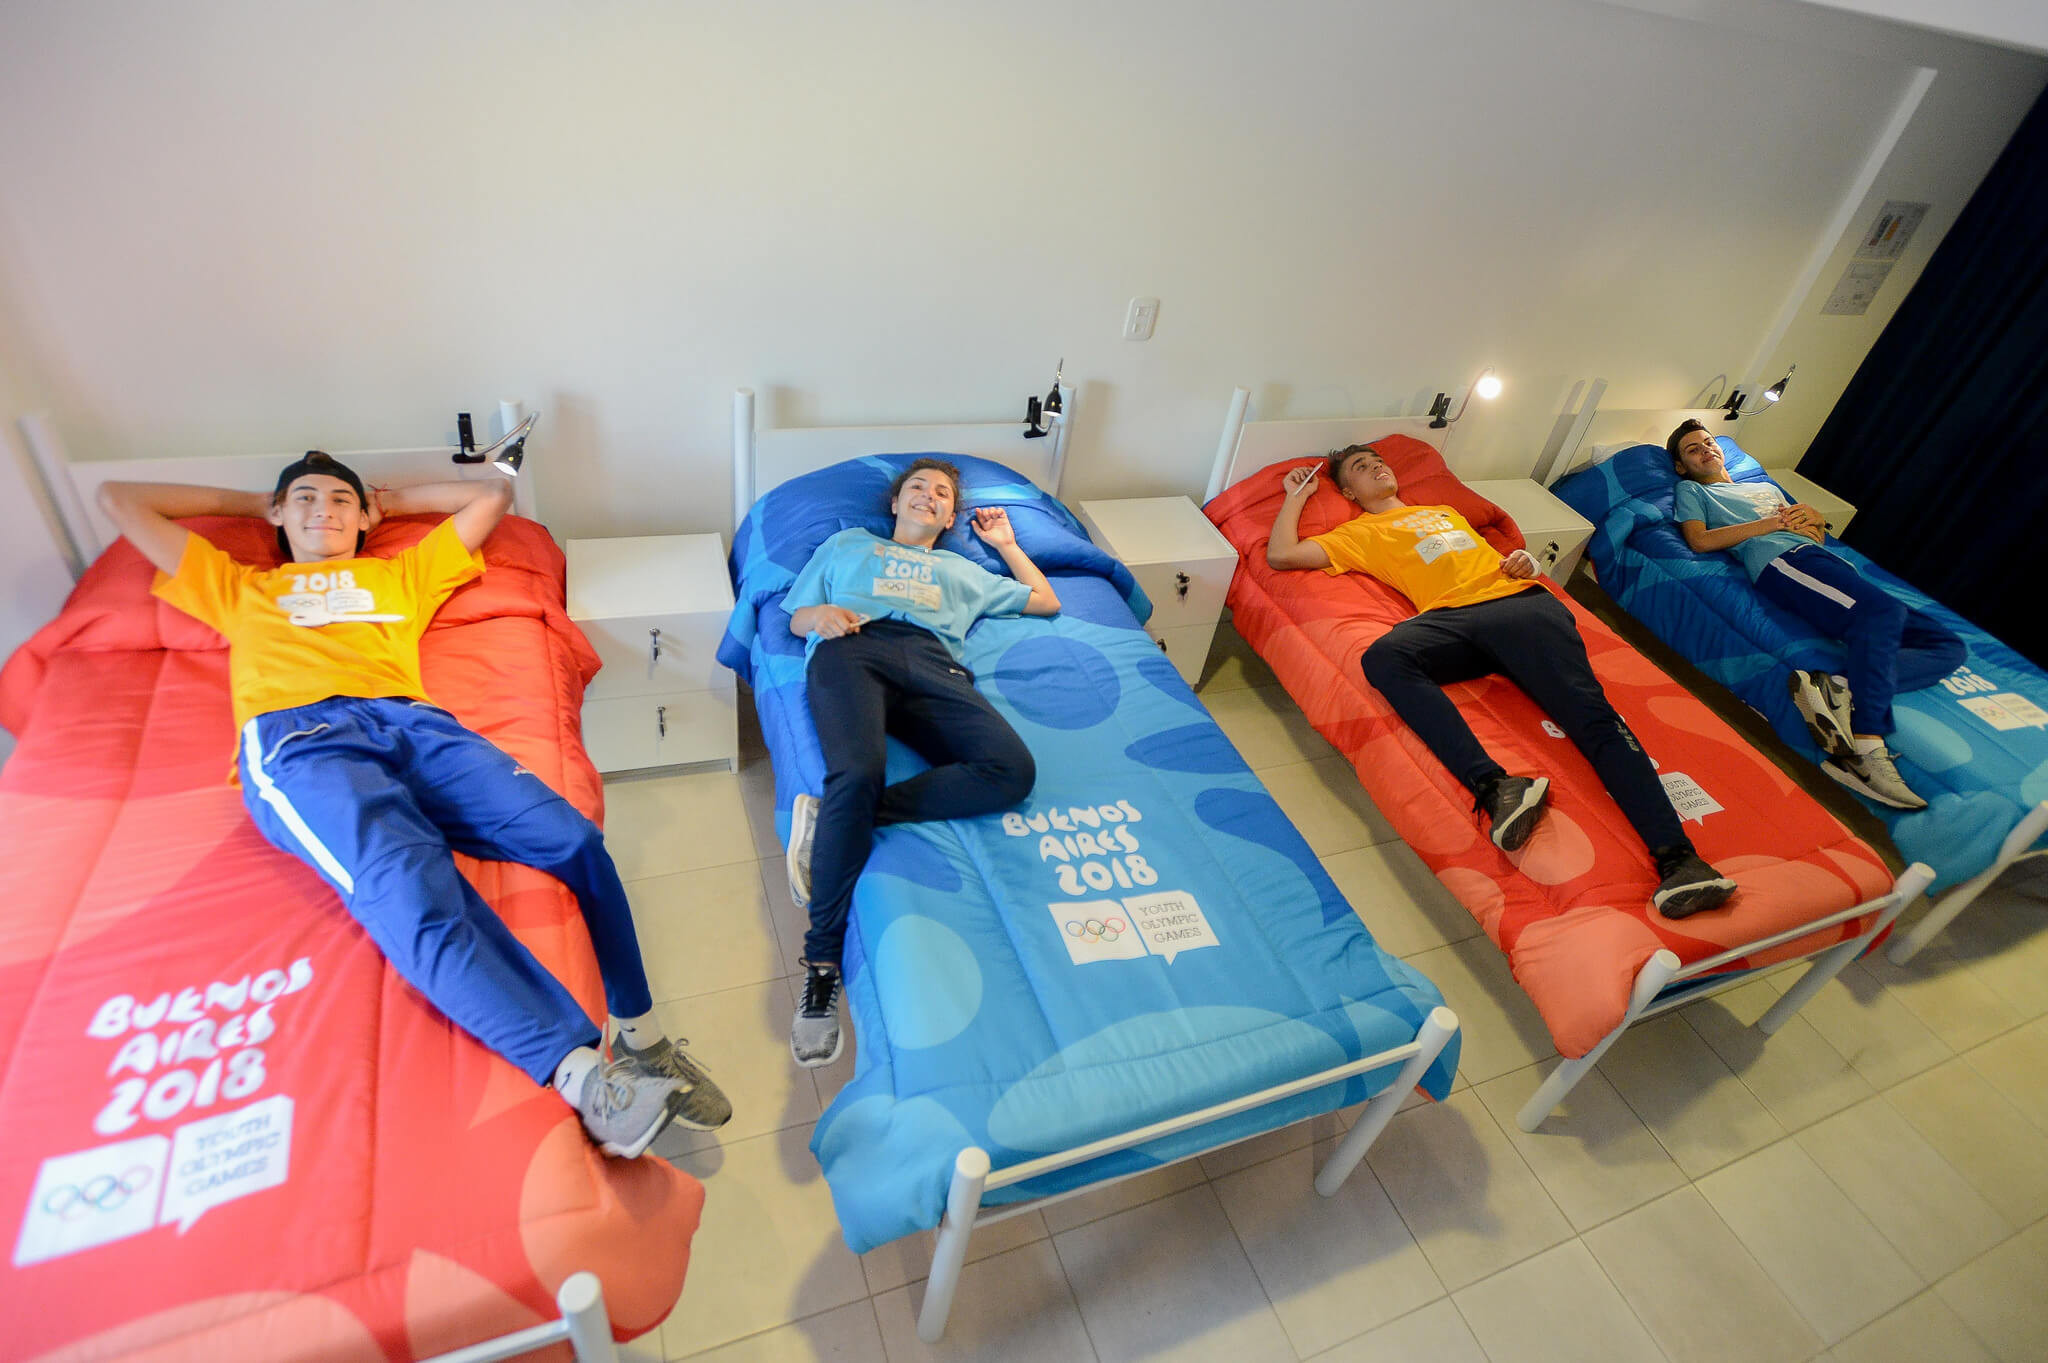 Aspiring athletes test out beds in the Village ©Buenos Aires 2018